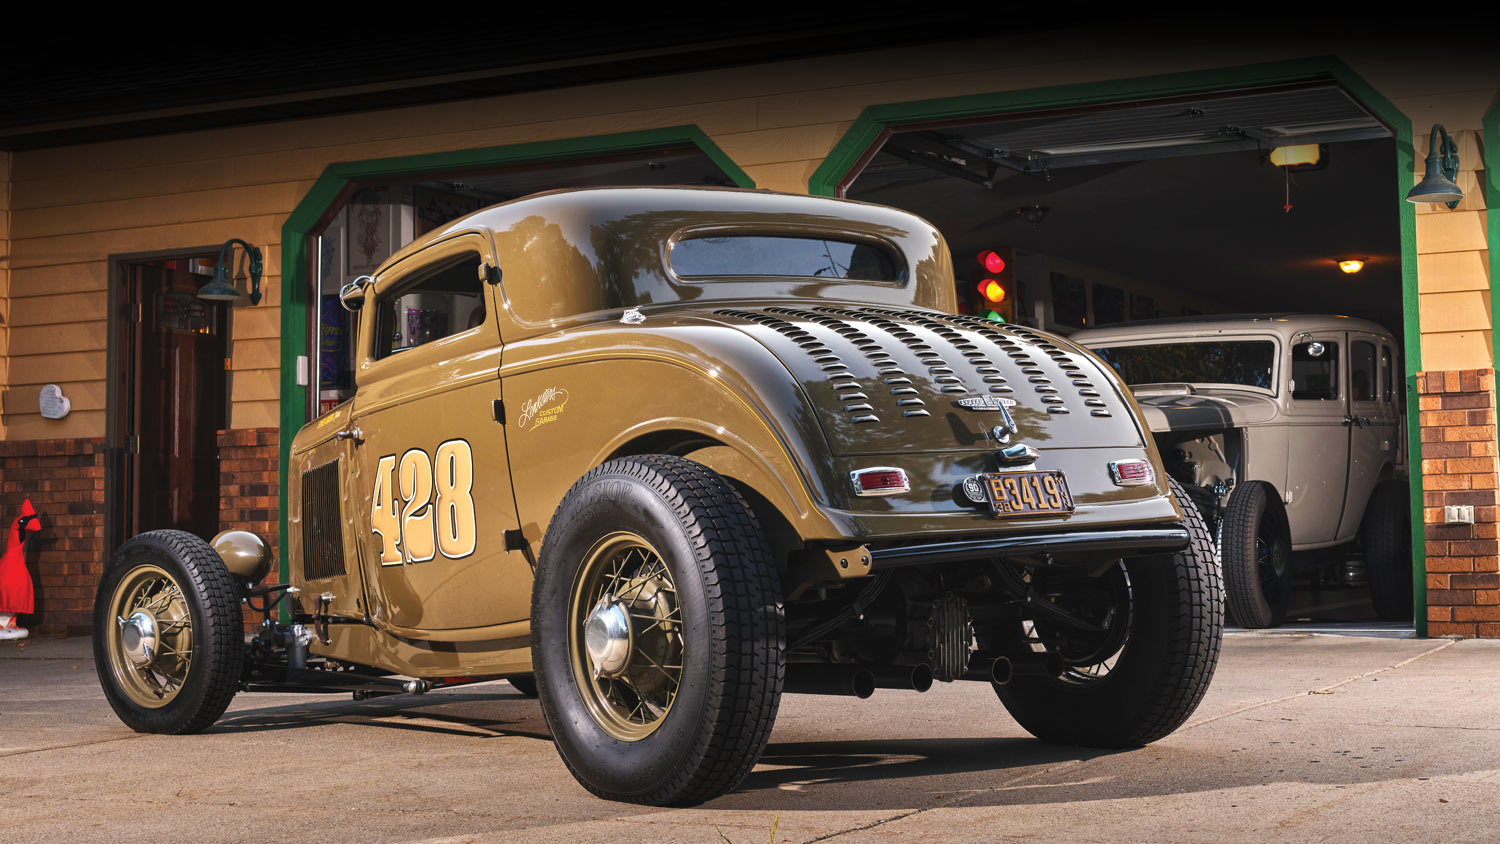 rear of a brown ’32 Ford with the number 428 on the side